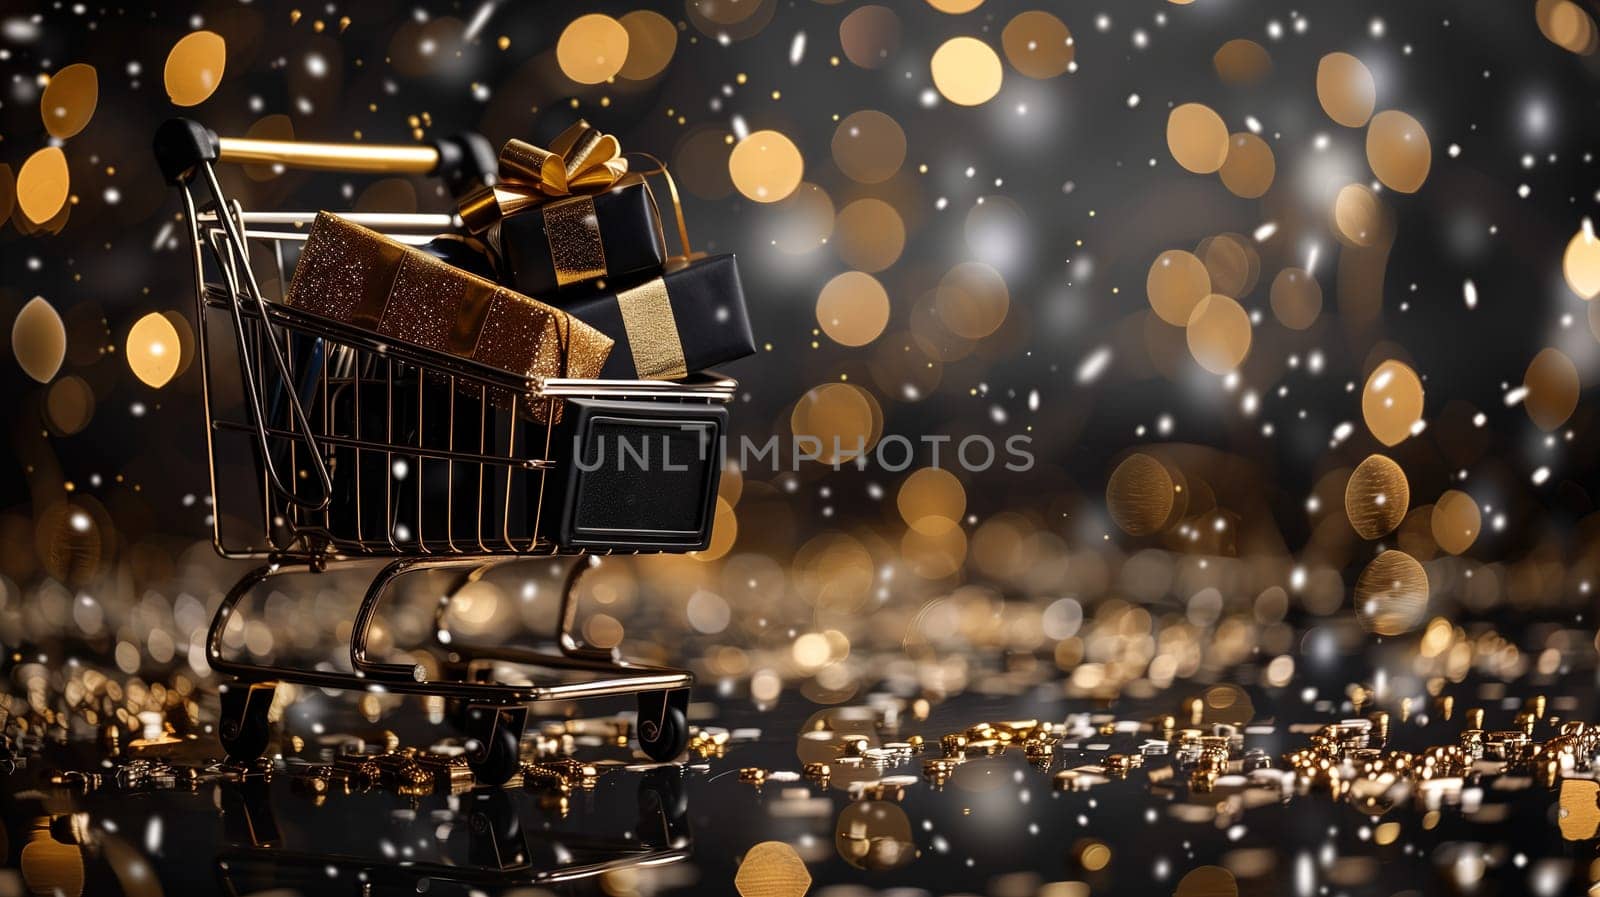 Shopping Cart Filled With Presents on Table by TRMK